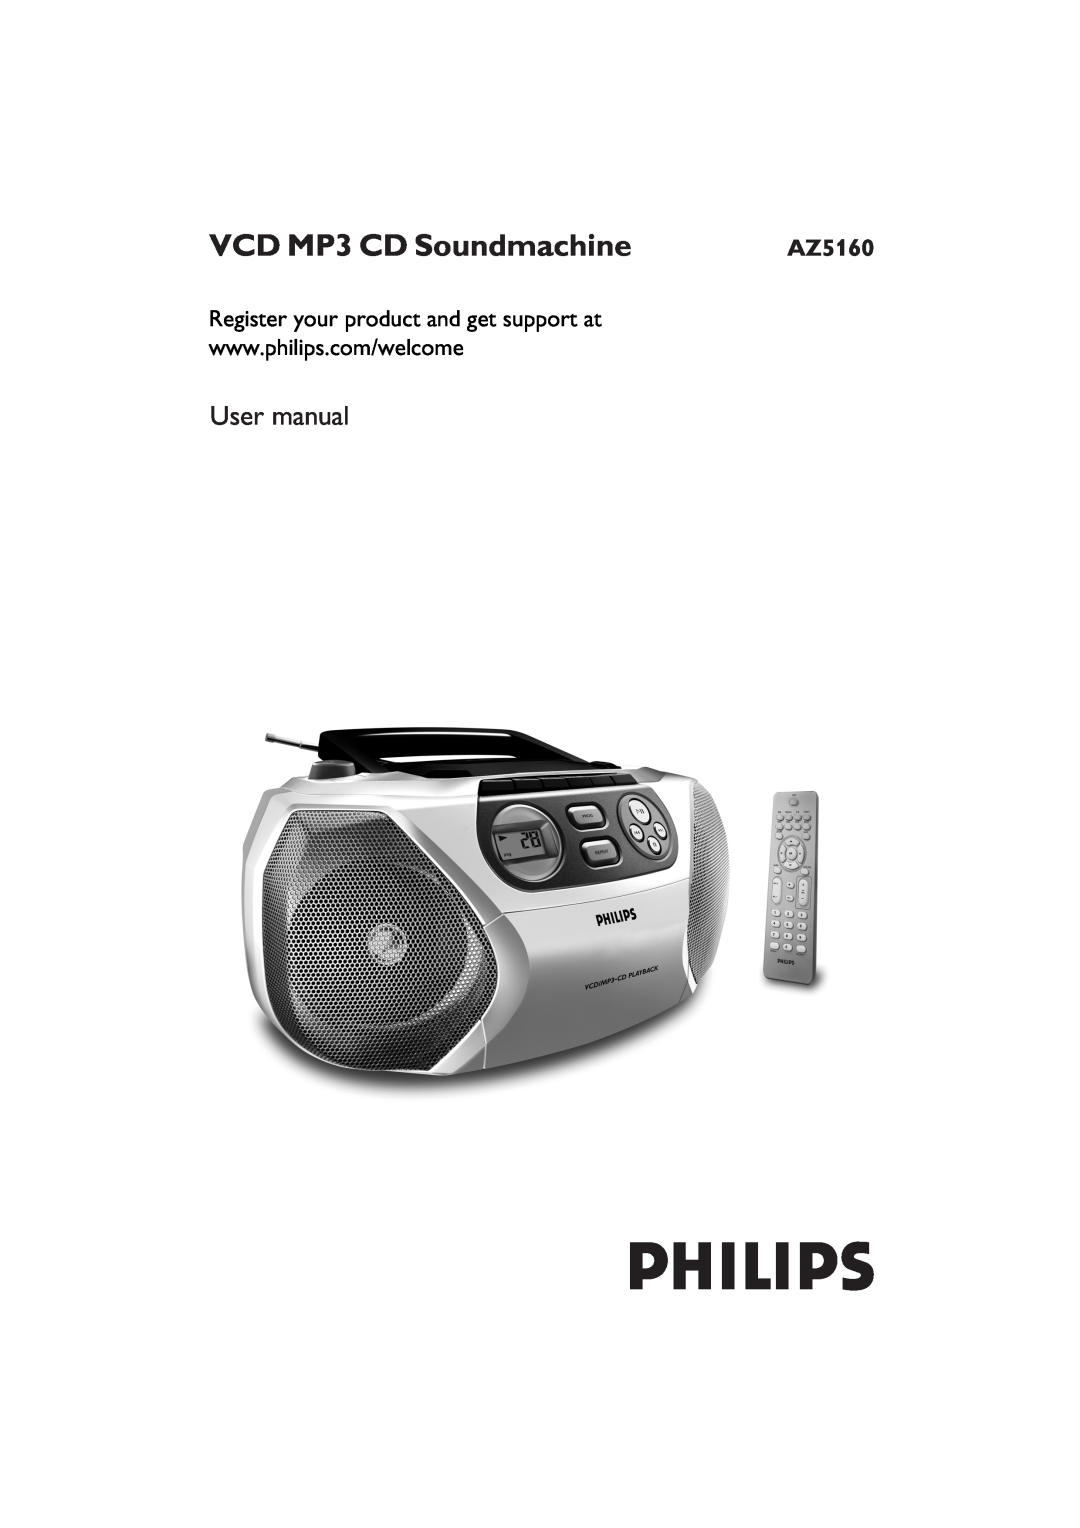 Philips AZ5160 user manual VCD MP3 CD Soundmachine, Register your product and get support at 